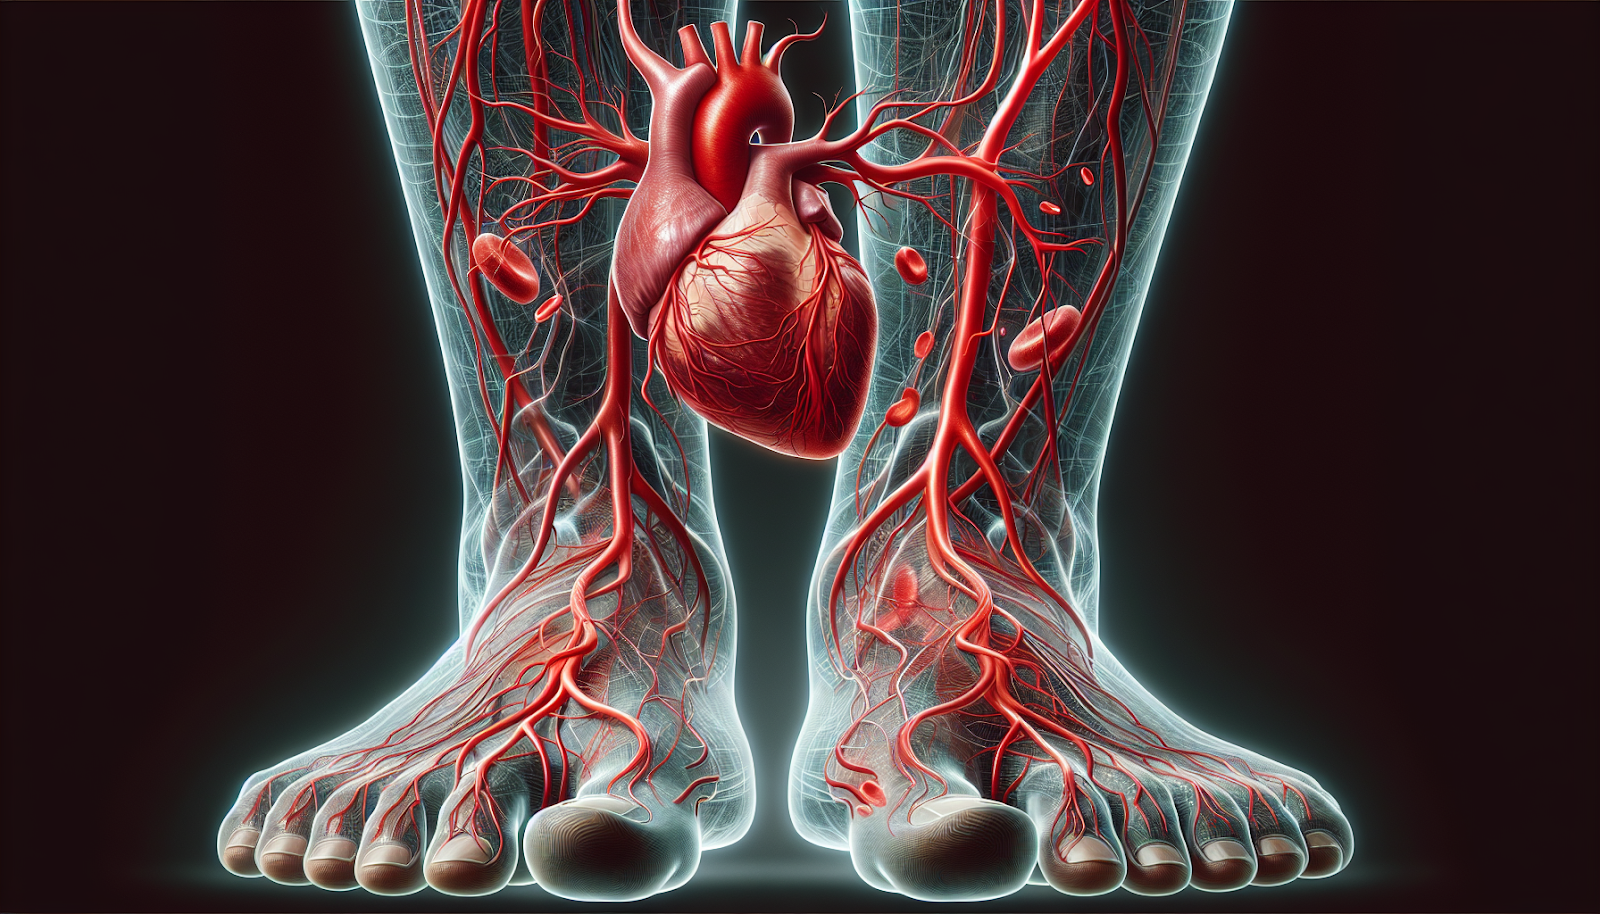 Illustration of blood circulation in the human body